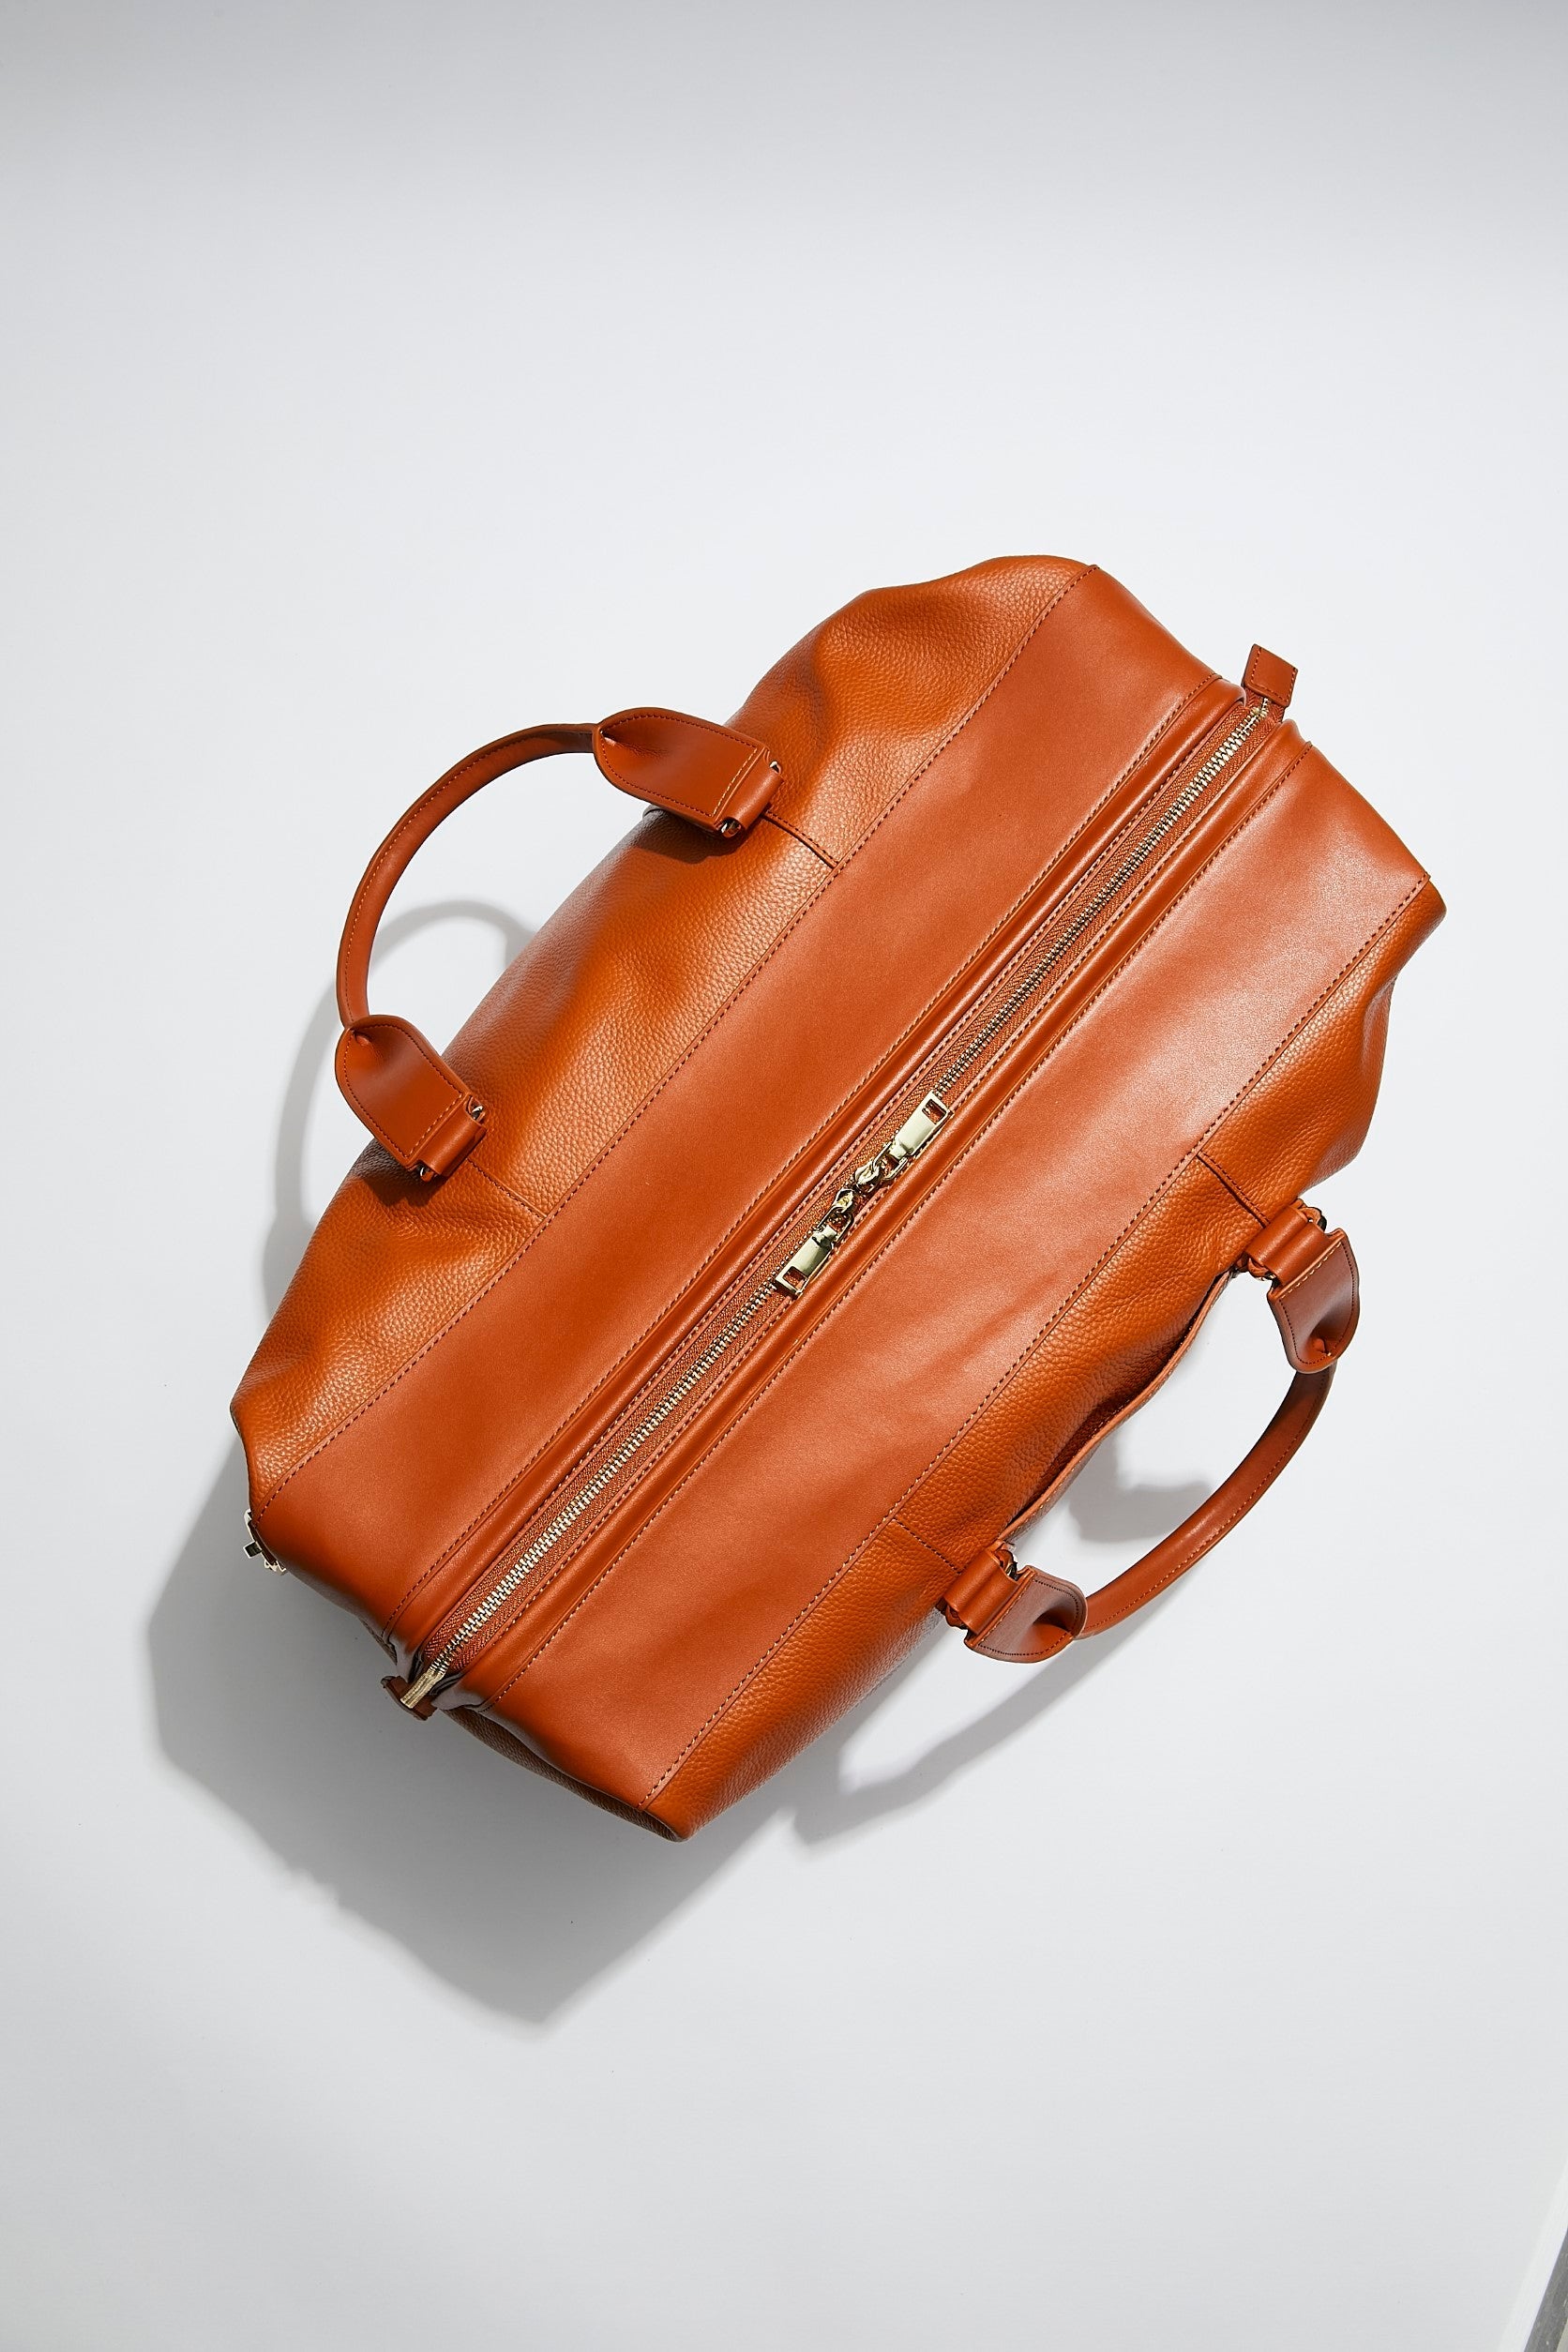 top view of mon purse's camel brown leather weekender bag that is large enough for weekends away and overnight stays